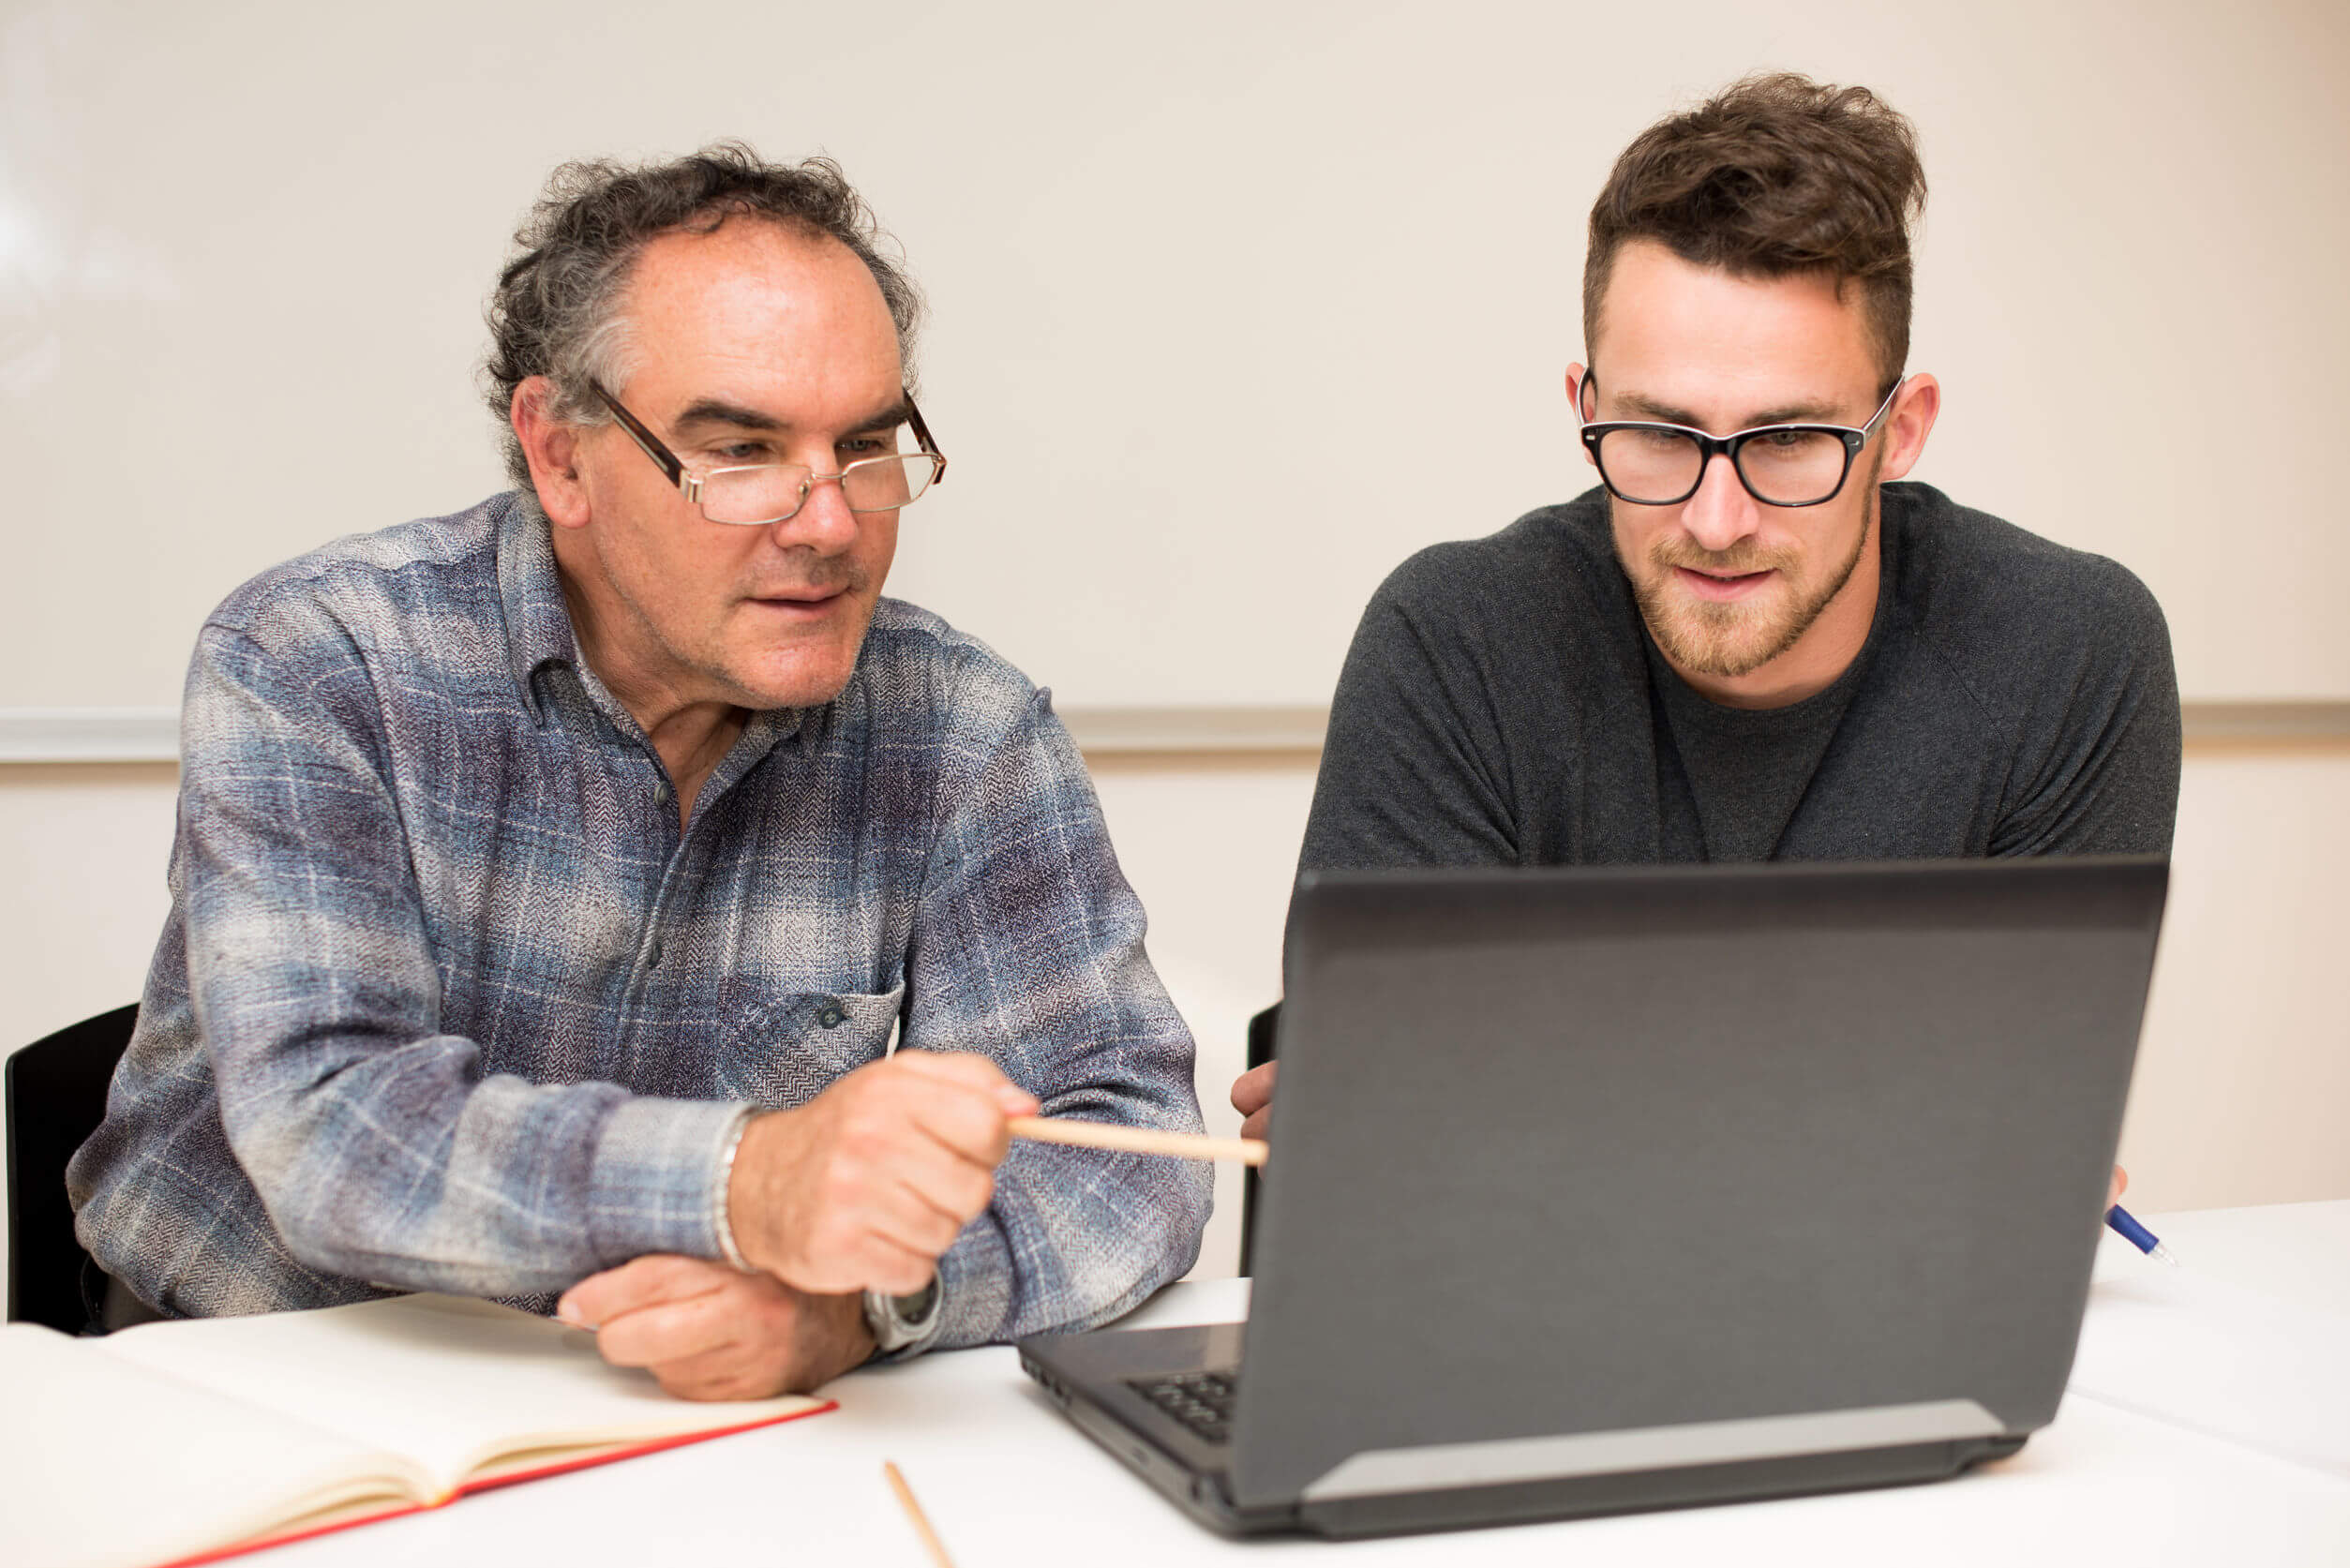 Researchers looking at a laptop computer.